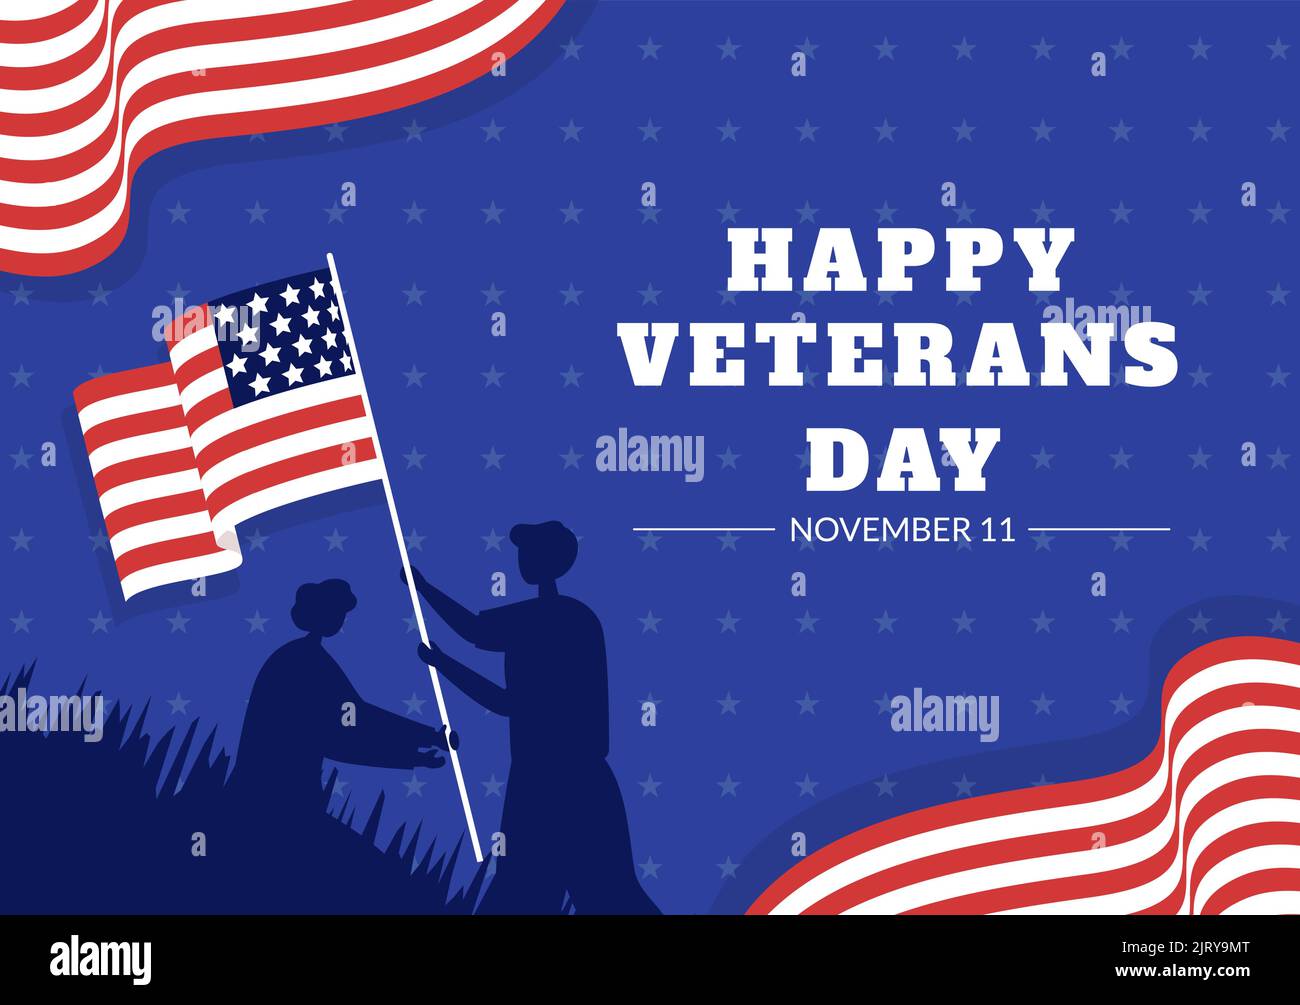 Veterans Day on November 11 Template Hand Drawn Cartoon Flat Illustration with USA Flag and Army to Honoring All Who Served Stock Vector